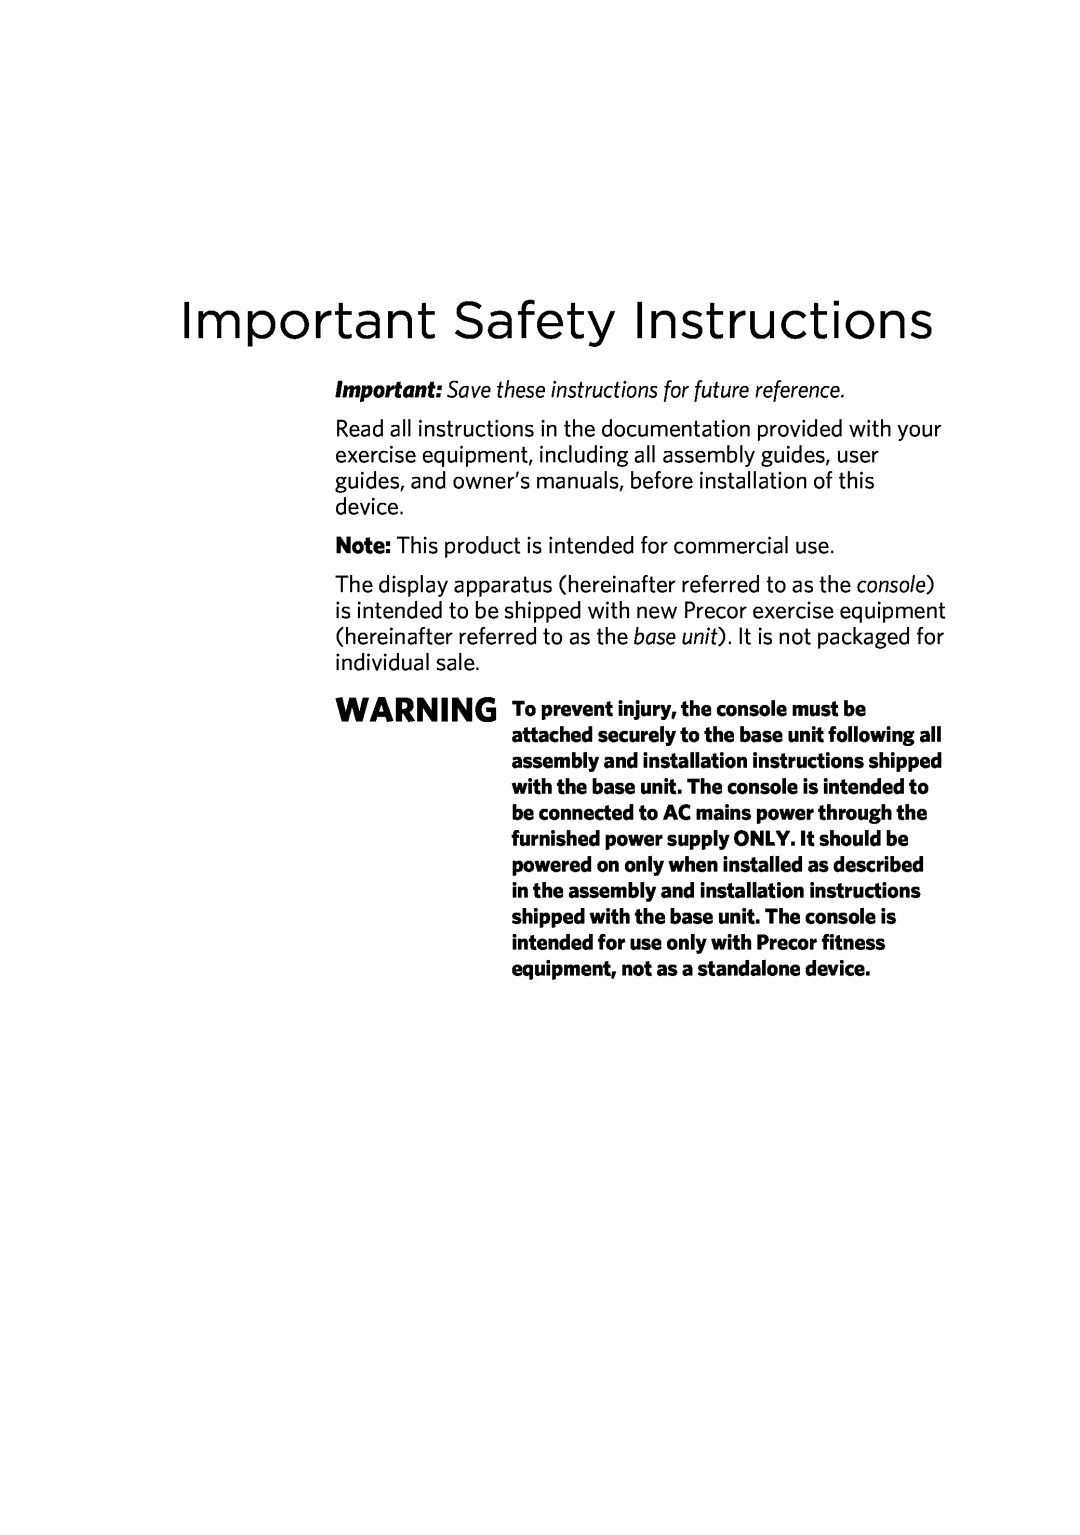 Precor P30 manual Important Safety Instructions, Important Save these instructions for future reference 